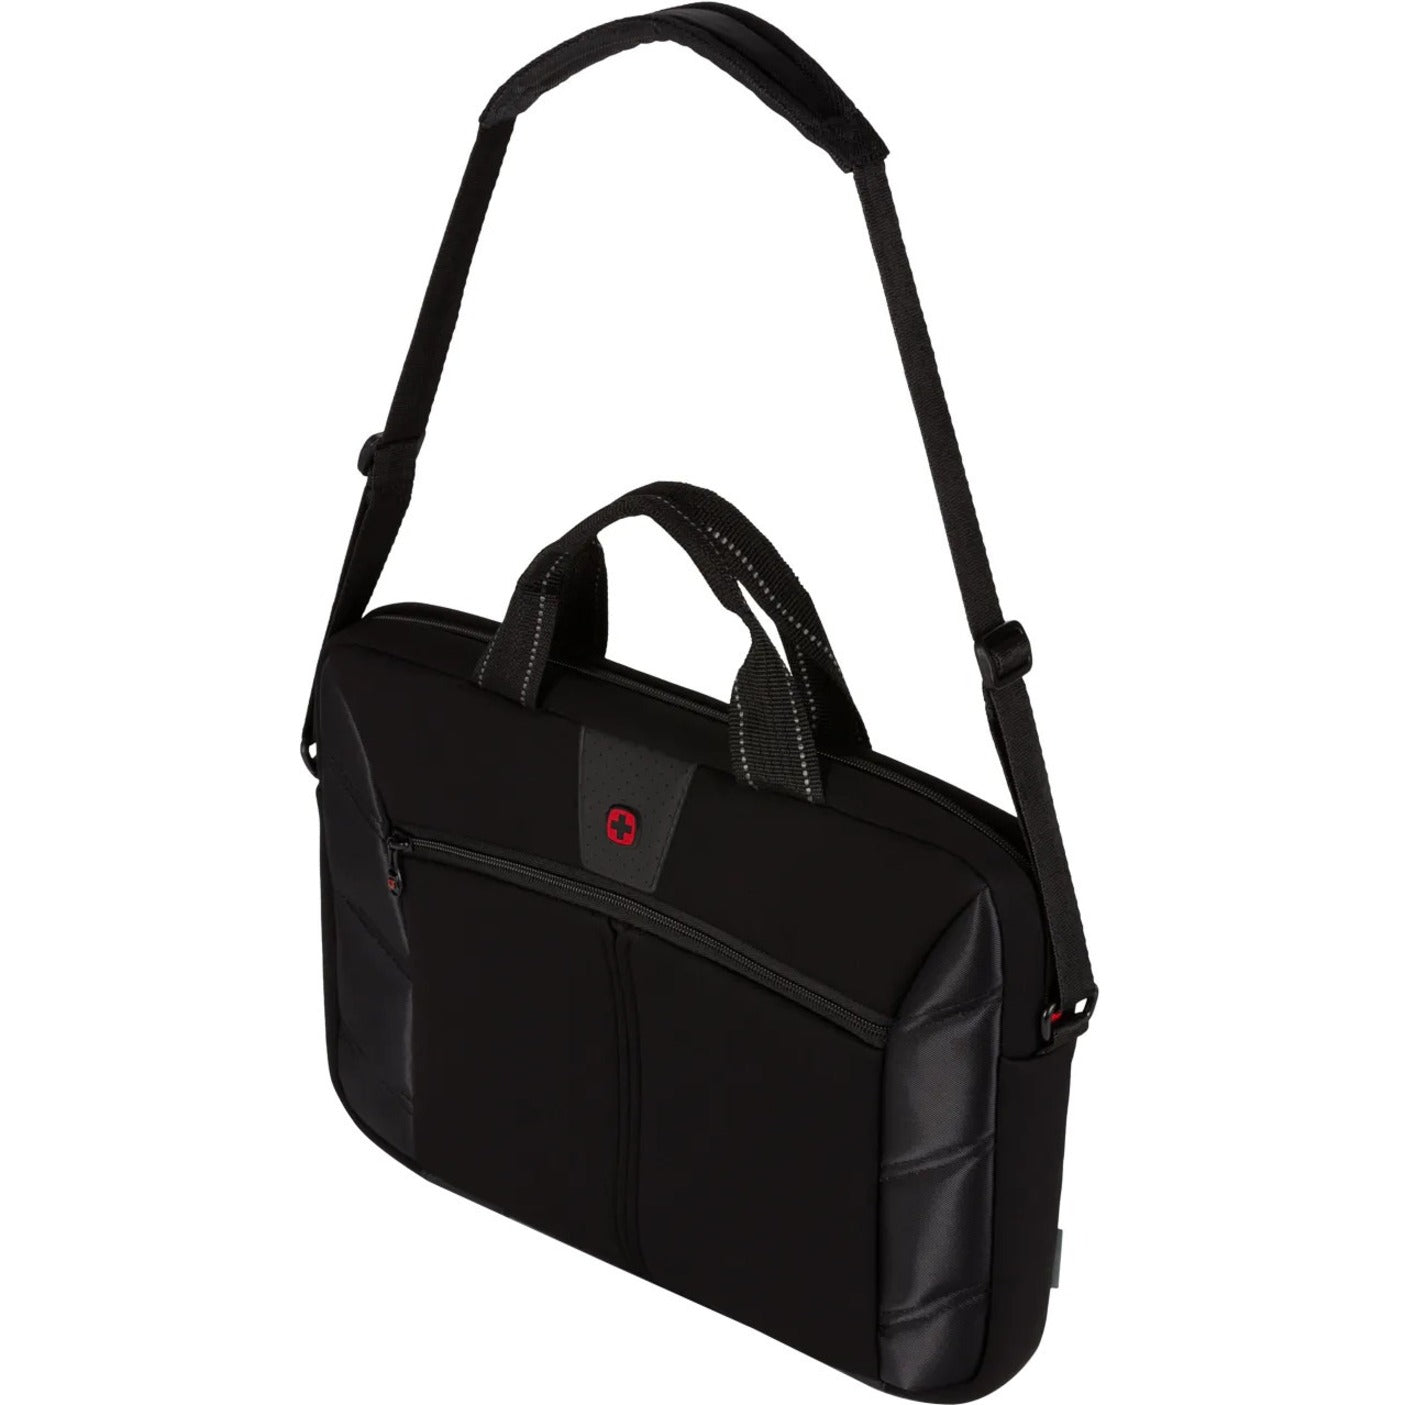 Wenger Sherpa 605295 Carrying Case (Sleeve) for 16" Notebook - Black [Discontinued]